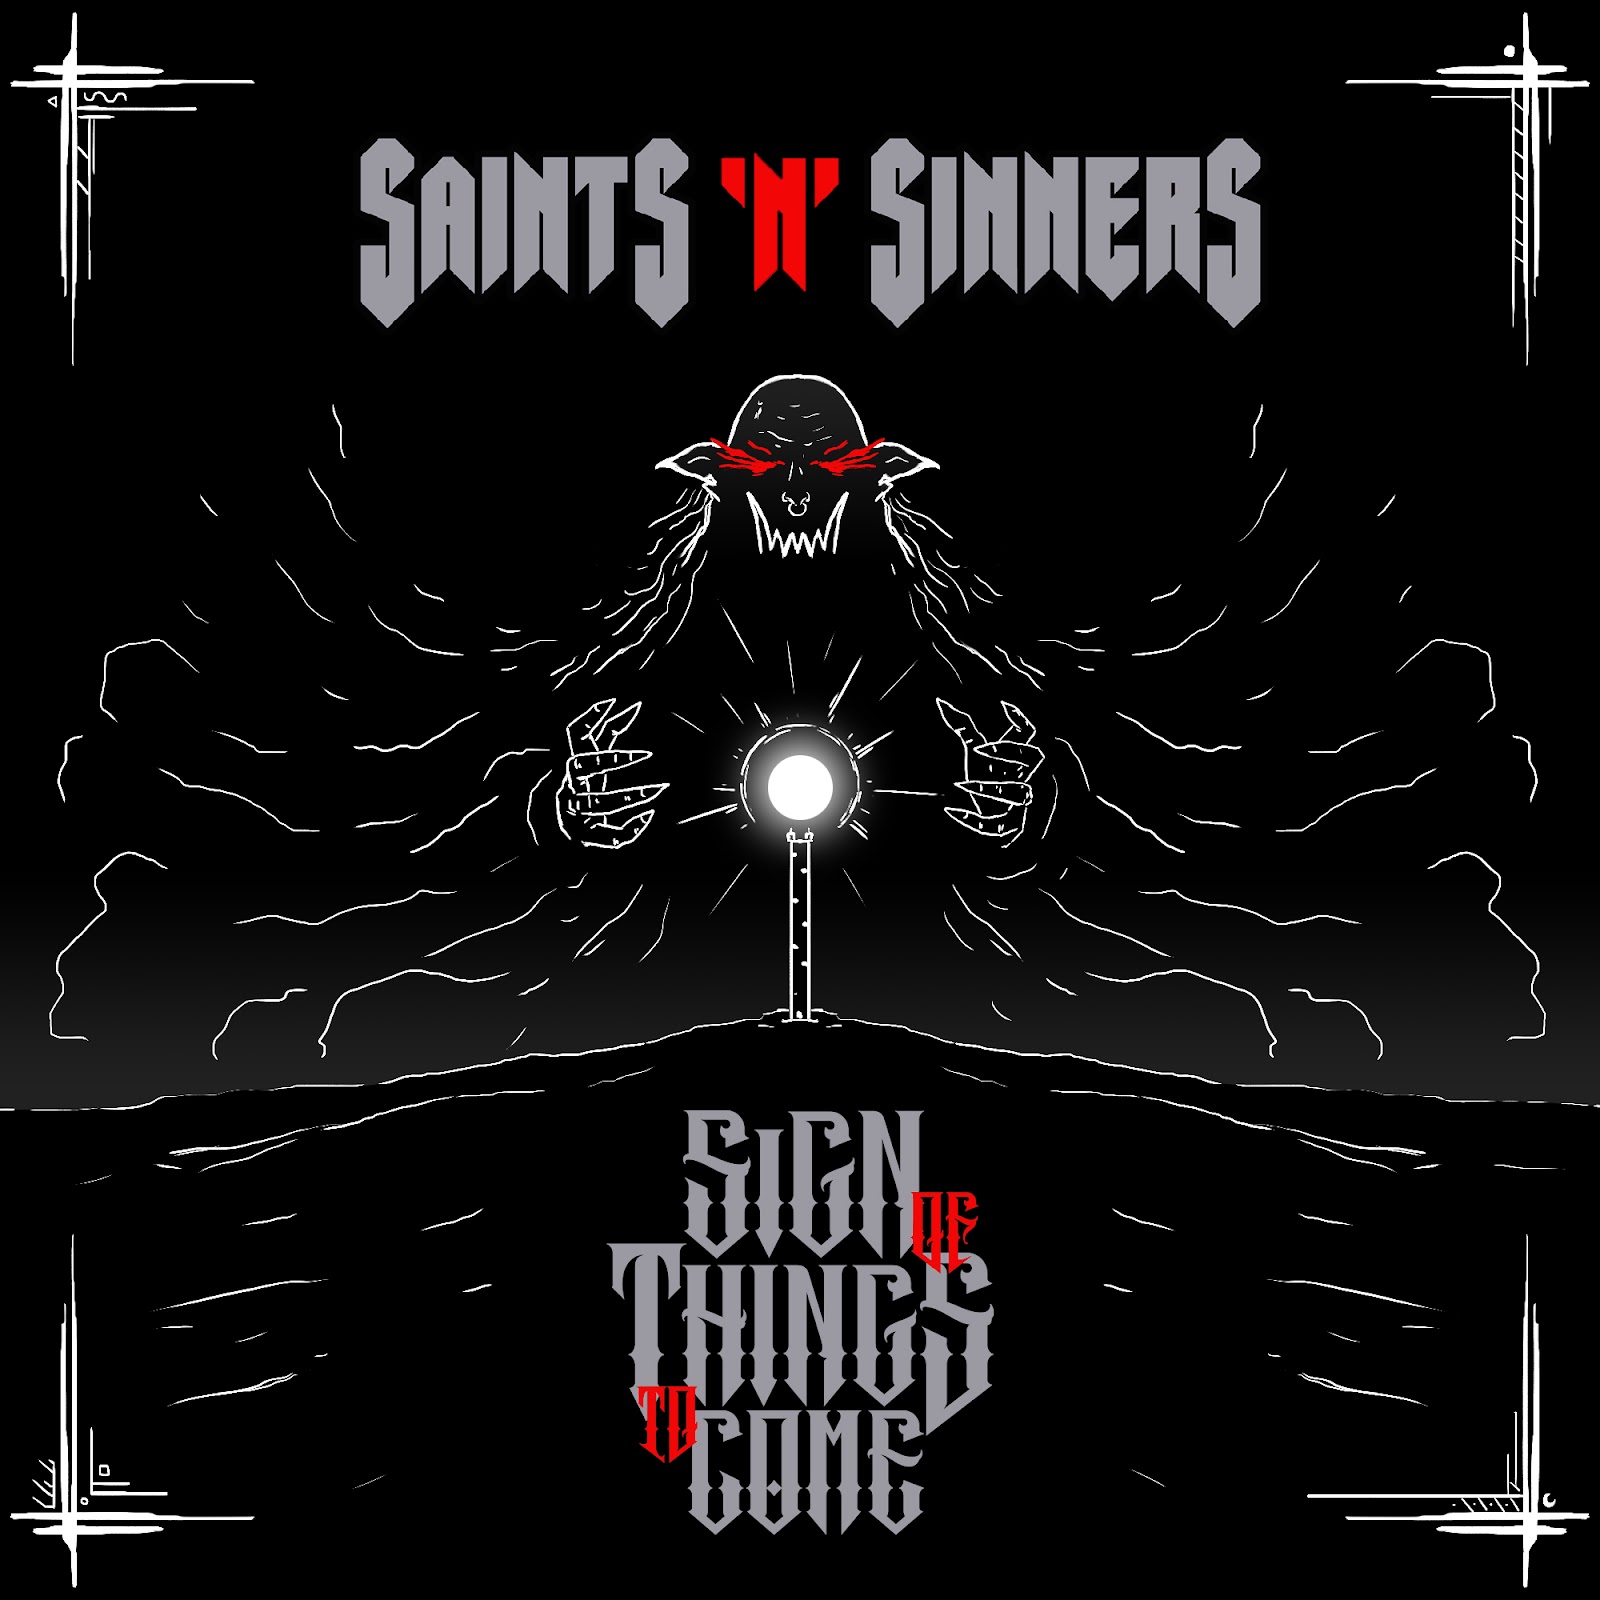 Single cover for Saints 'N' Sinners' Sign of Things to Come. Illustrated by kertburger.